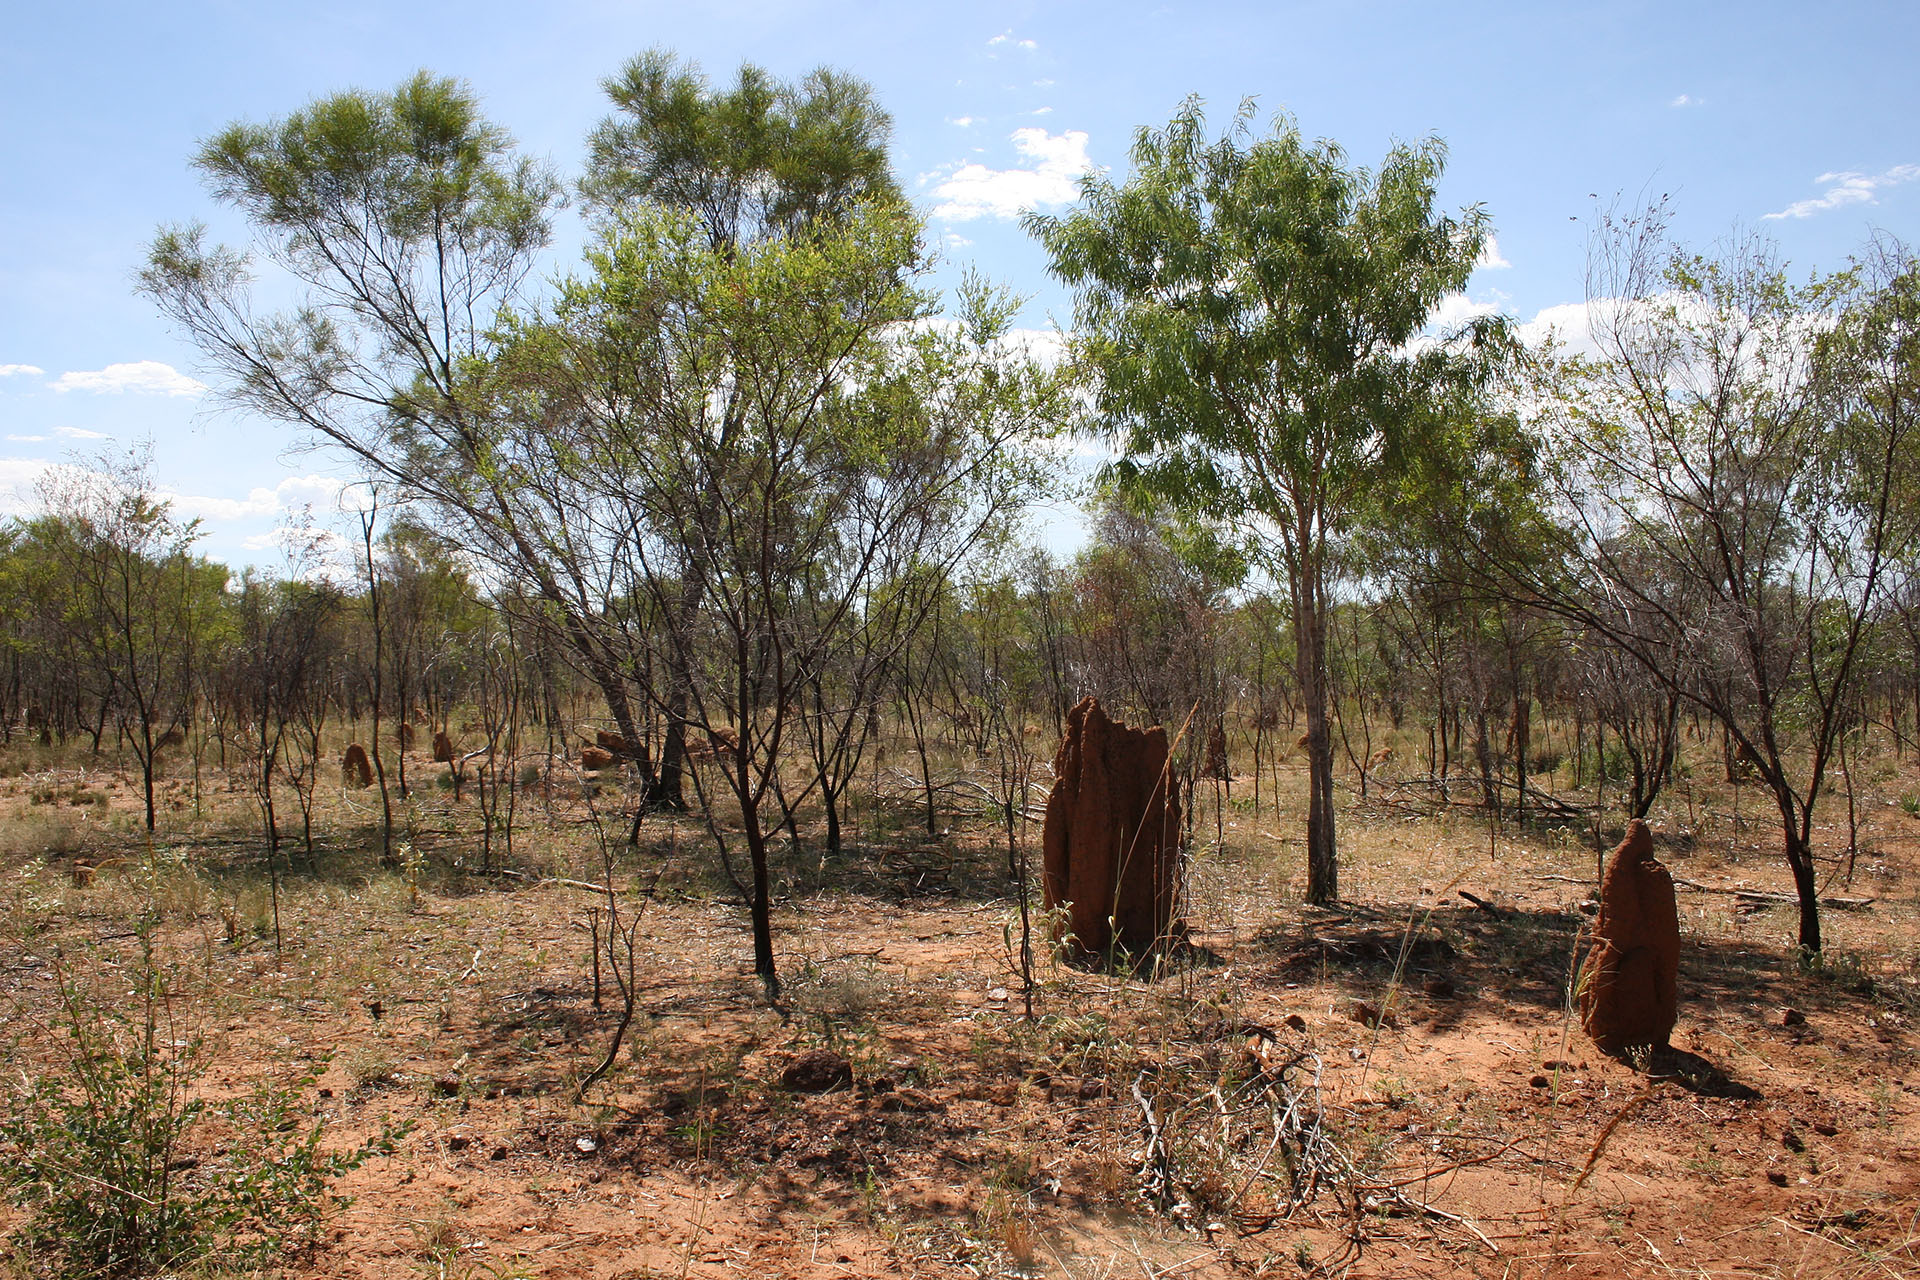 These termite mounds don't look like dinosaur dung anymore, but rather like <a href=